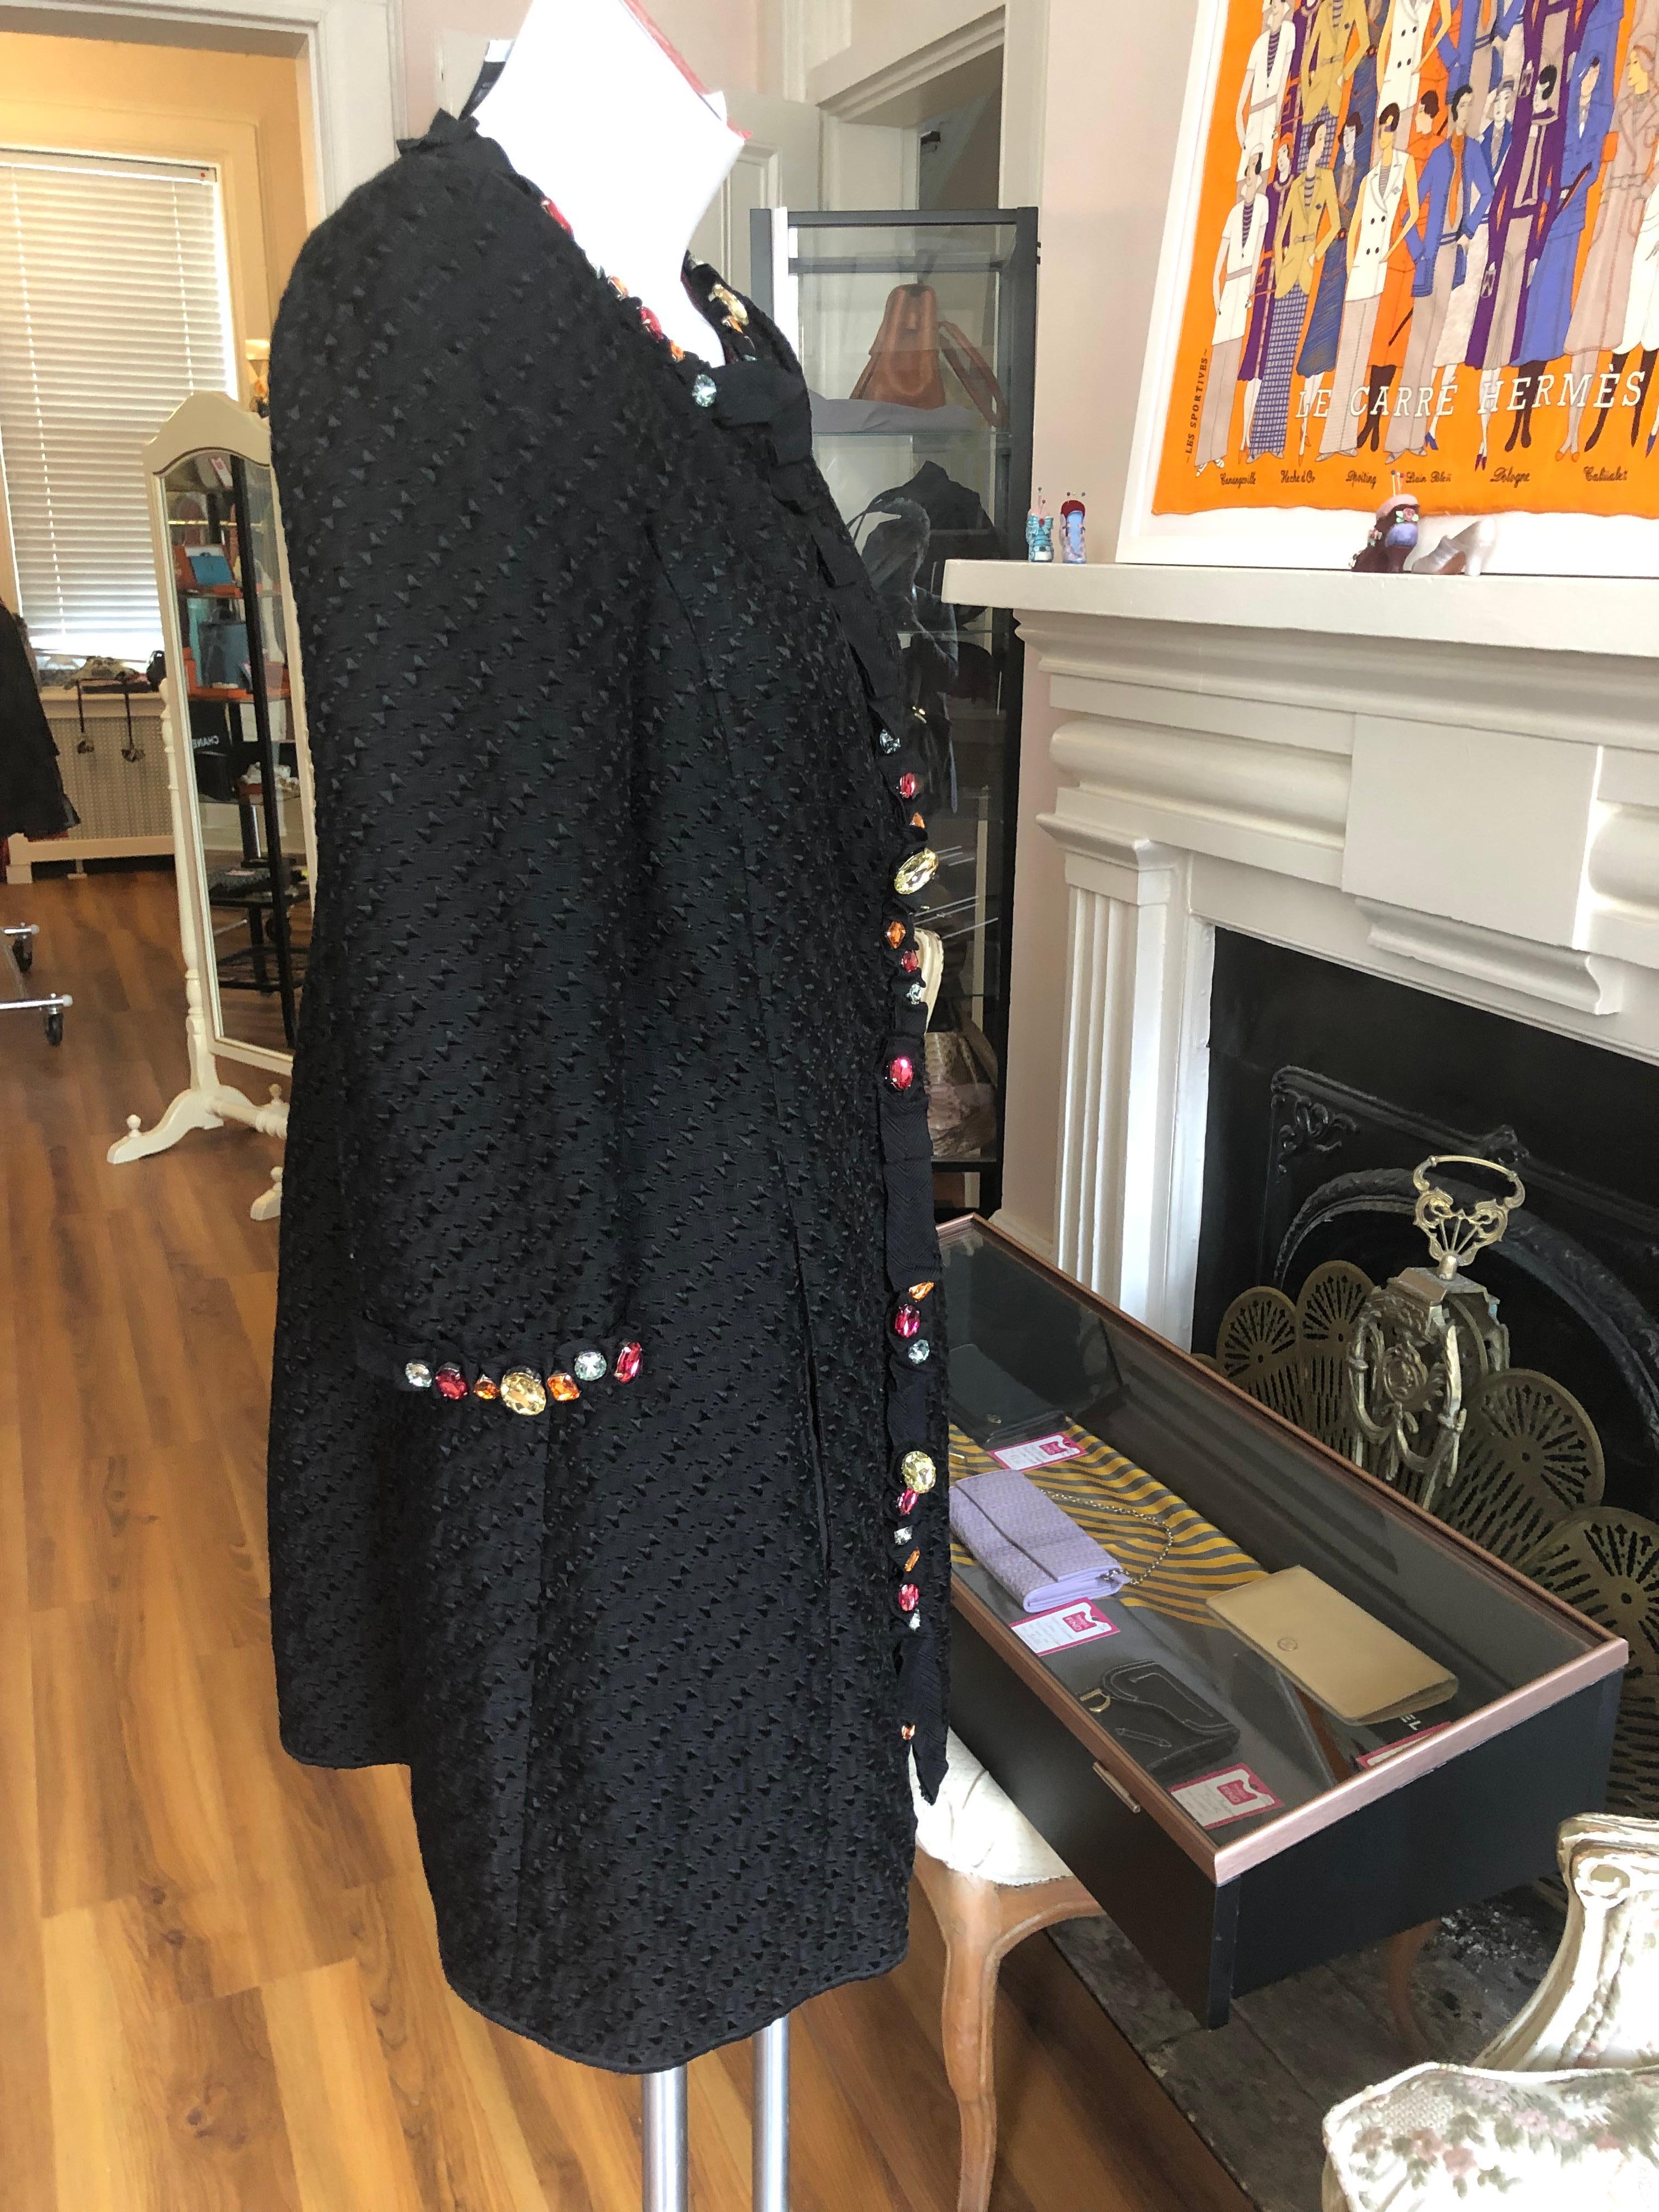 Fabulous Moschino Cheap and Chic coat in weaved cotton which forms a pattern. This coat is embellished with colored rhinestones; has wonderful inside seams; two front pockets and pleated accents.

It could be worn as both a coat and a dress.